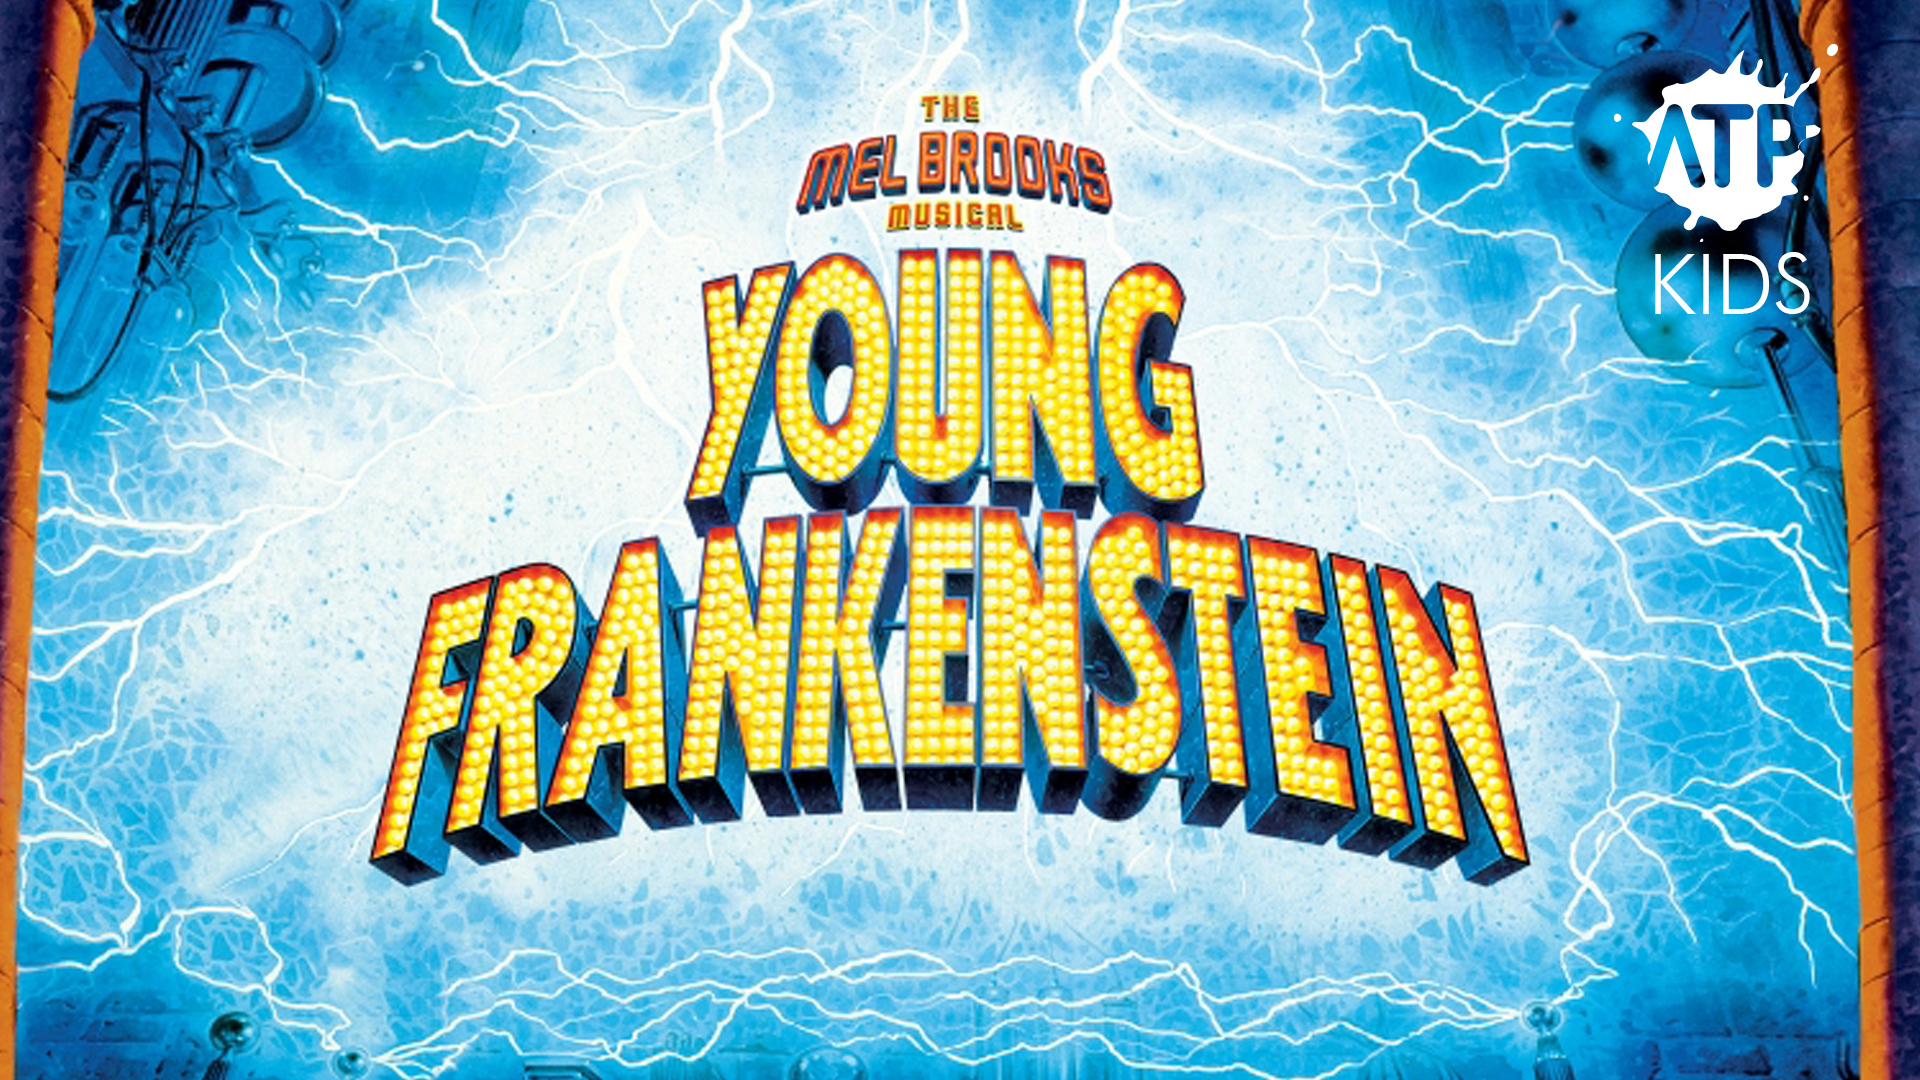 1920x1080 ATP Kids: Young Frankenstein the Musical on YouTube Apr 26th! | Whitefish Montana Lodging, Dining, and Official Visitor Informati